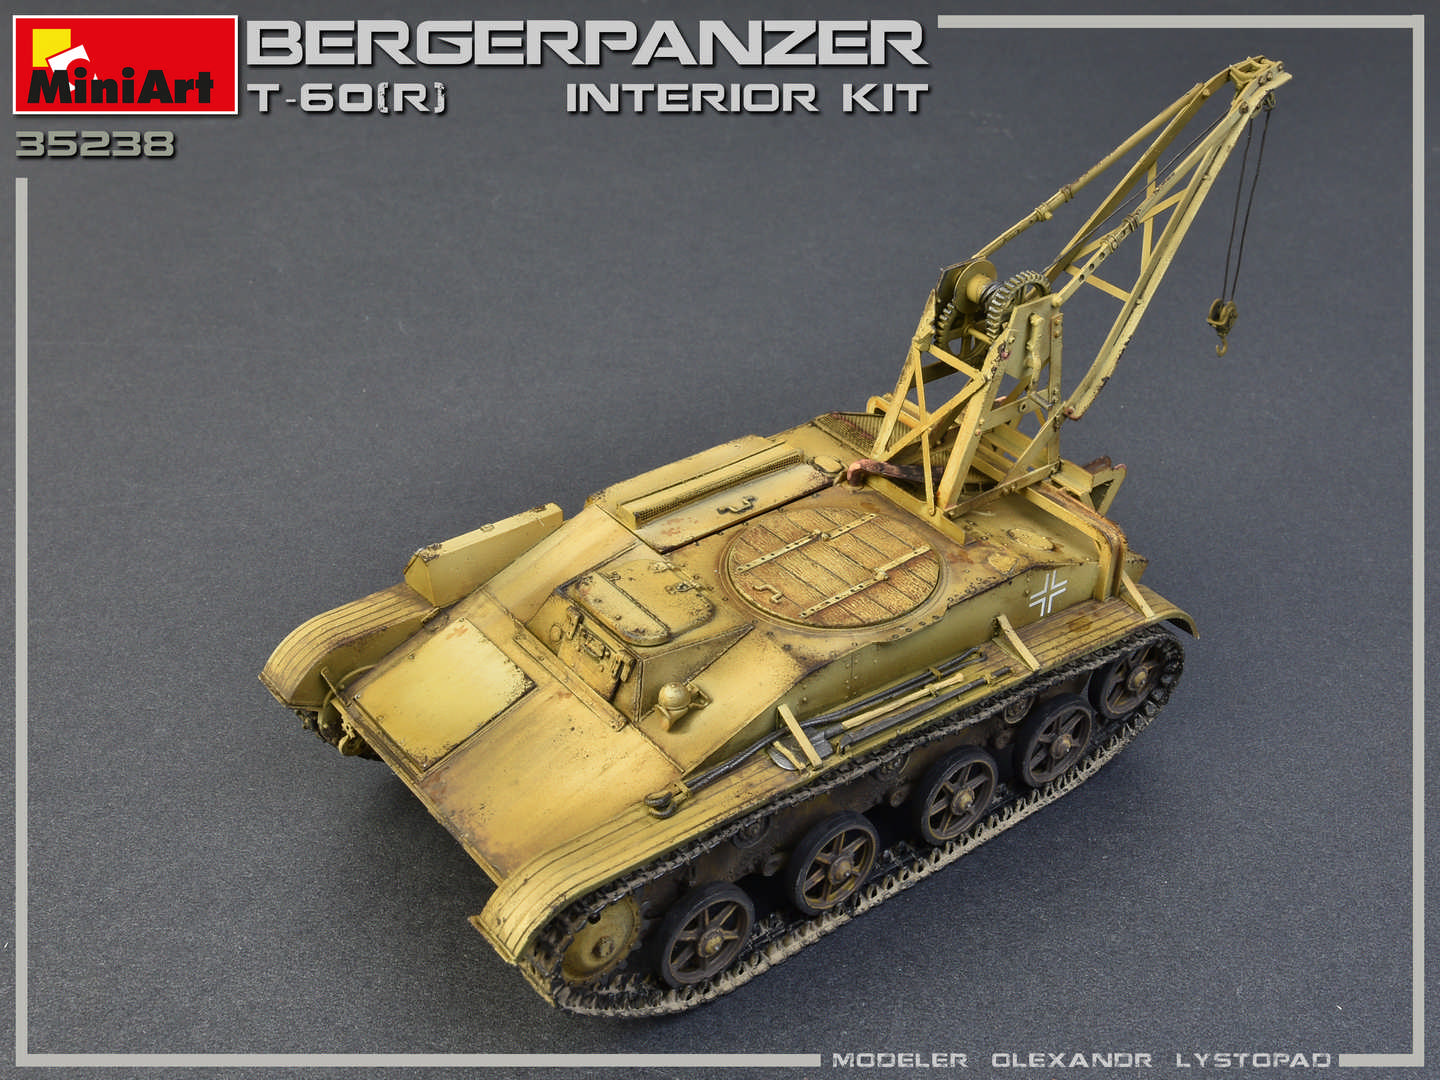 r With interior kit Miniart 35238 1:35th scale Bergepanzer T-60 